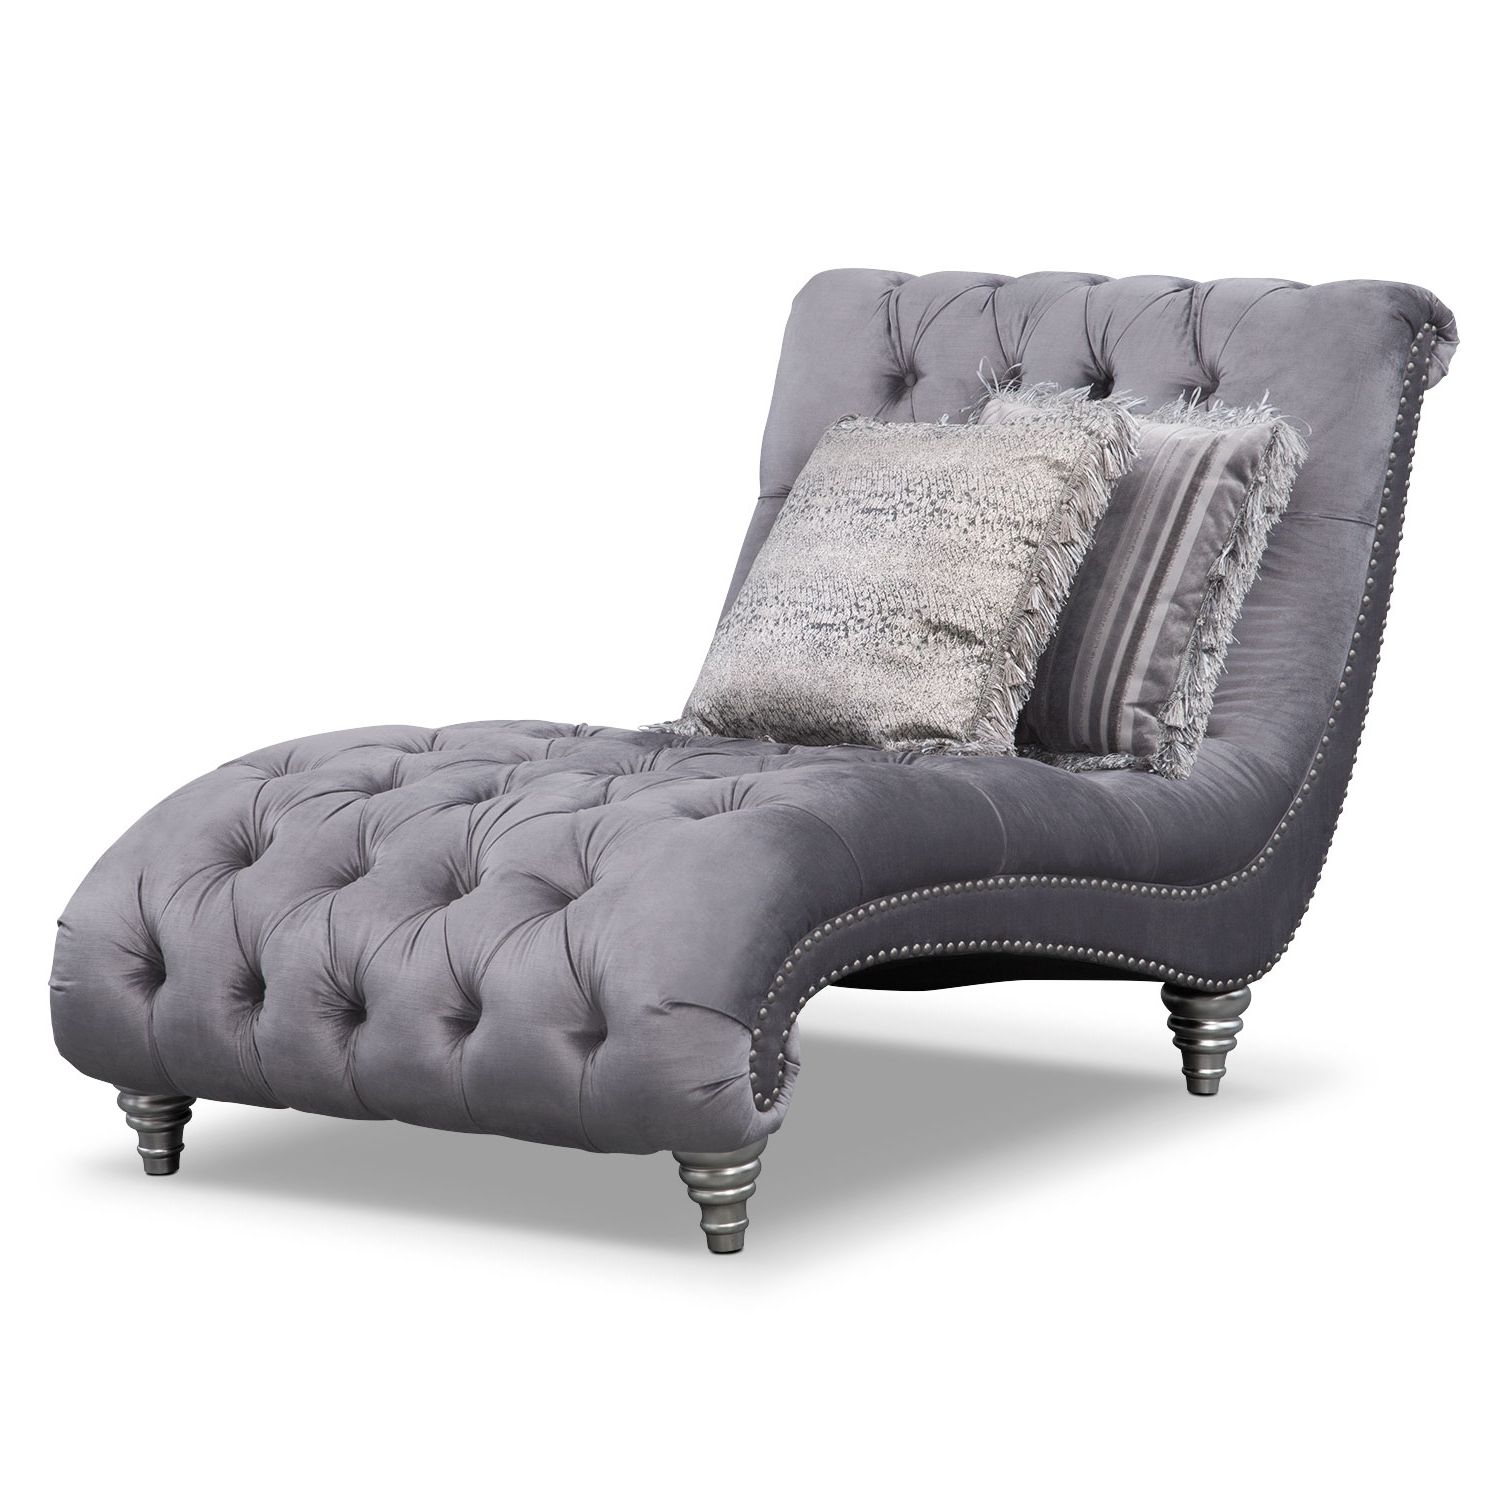 Favorite Gray Chaise Lounge Chair • Lounge Chairs Ideas Regarding Gray Chaise Lounges (View 4 of 15)